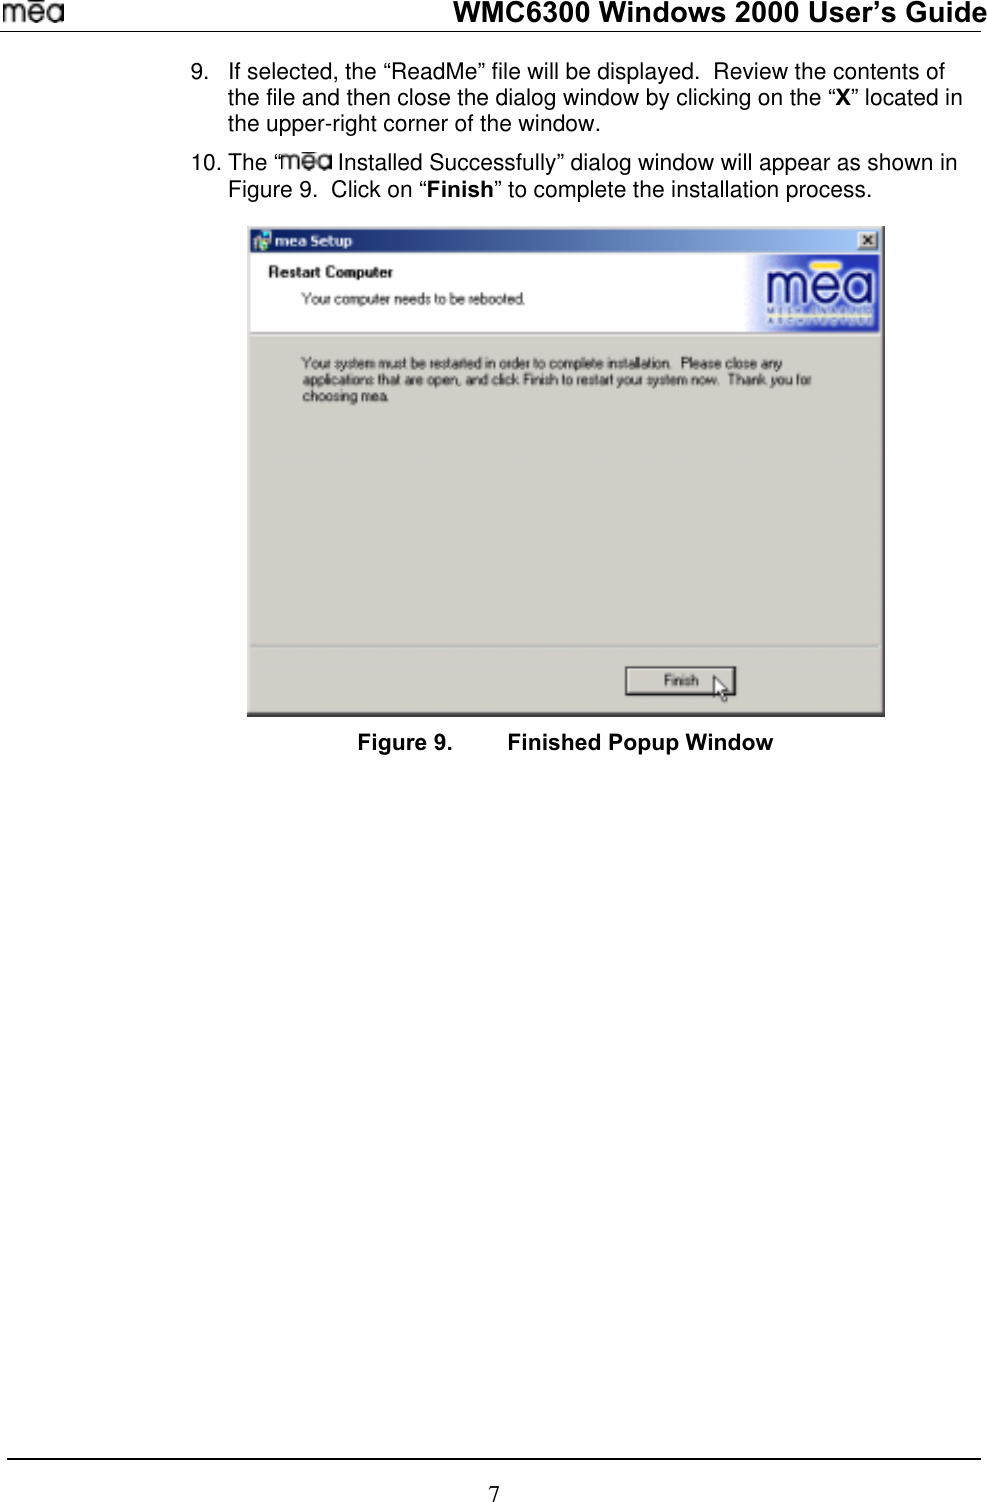   WMC6300 Windows 2000 User’s Guide 9. 10.If selected, the “ReadMe” file will be displayed.  Review the contents of the file and then close the dialog window by clicking on the “X” located in the upper-right corner of the window.   The “  Installed Successfully” dialog window will appear as shown in Figure 9.  Click on “Finish” to complete the installation process.  Figure 9.  Finished Popup Window 7 